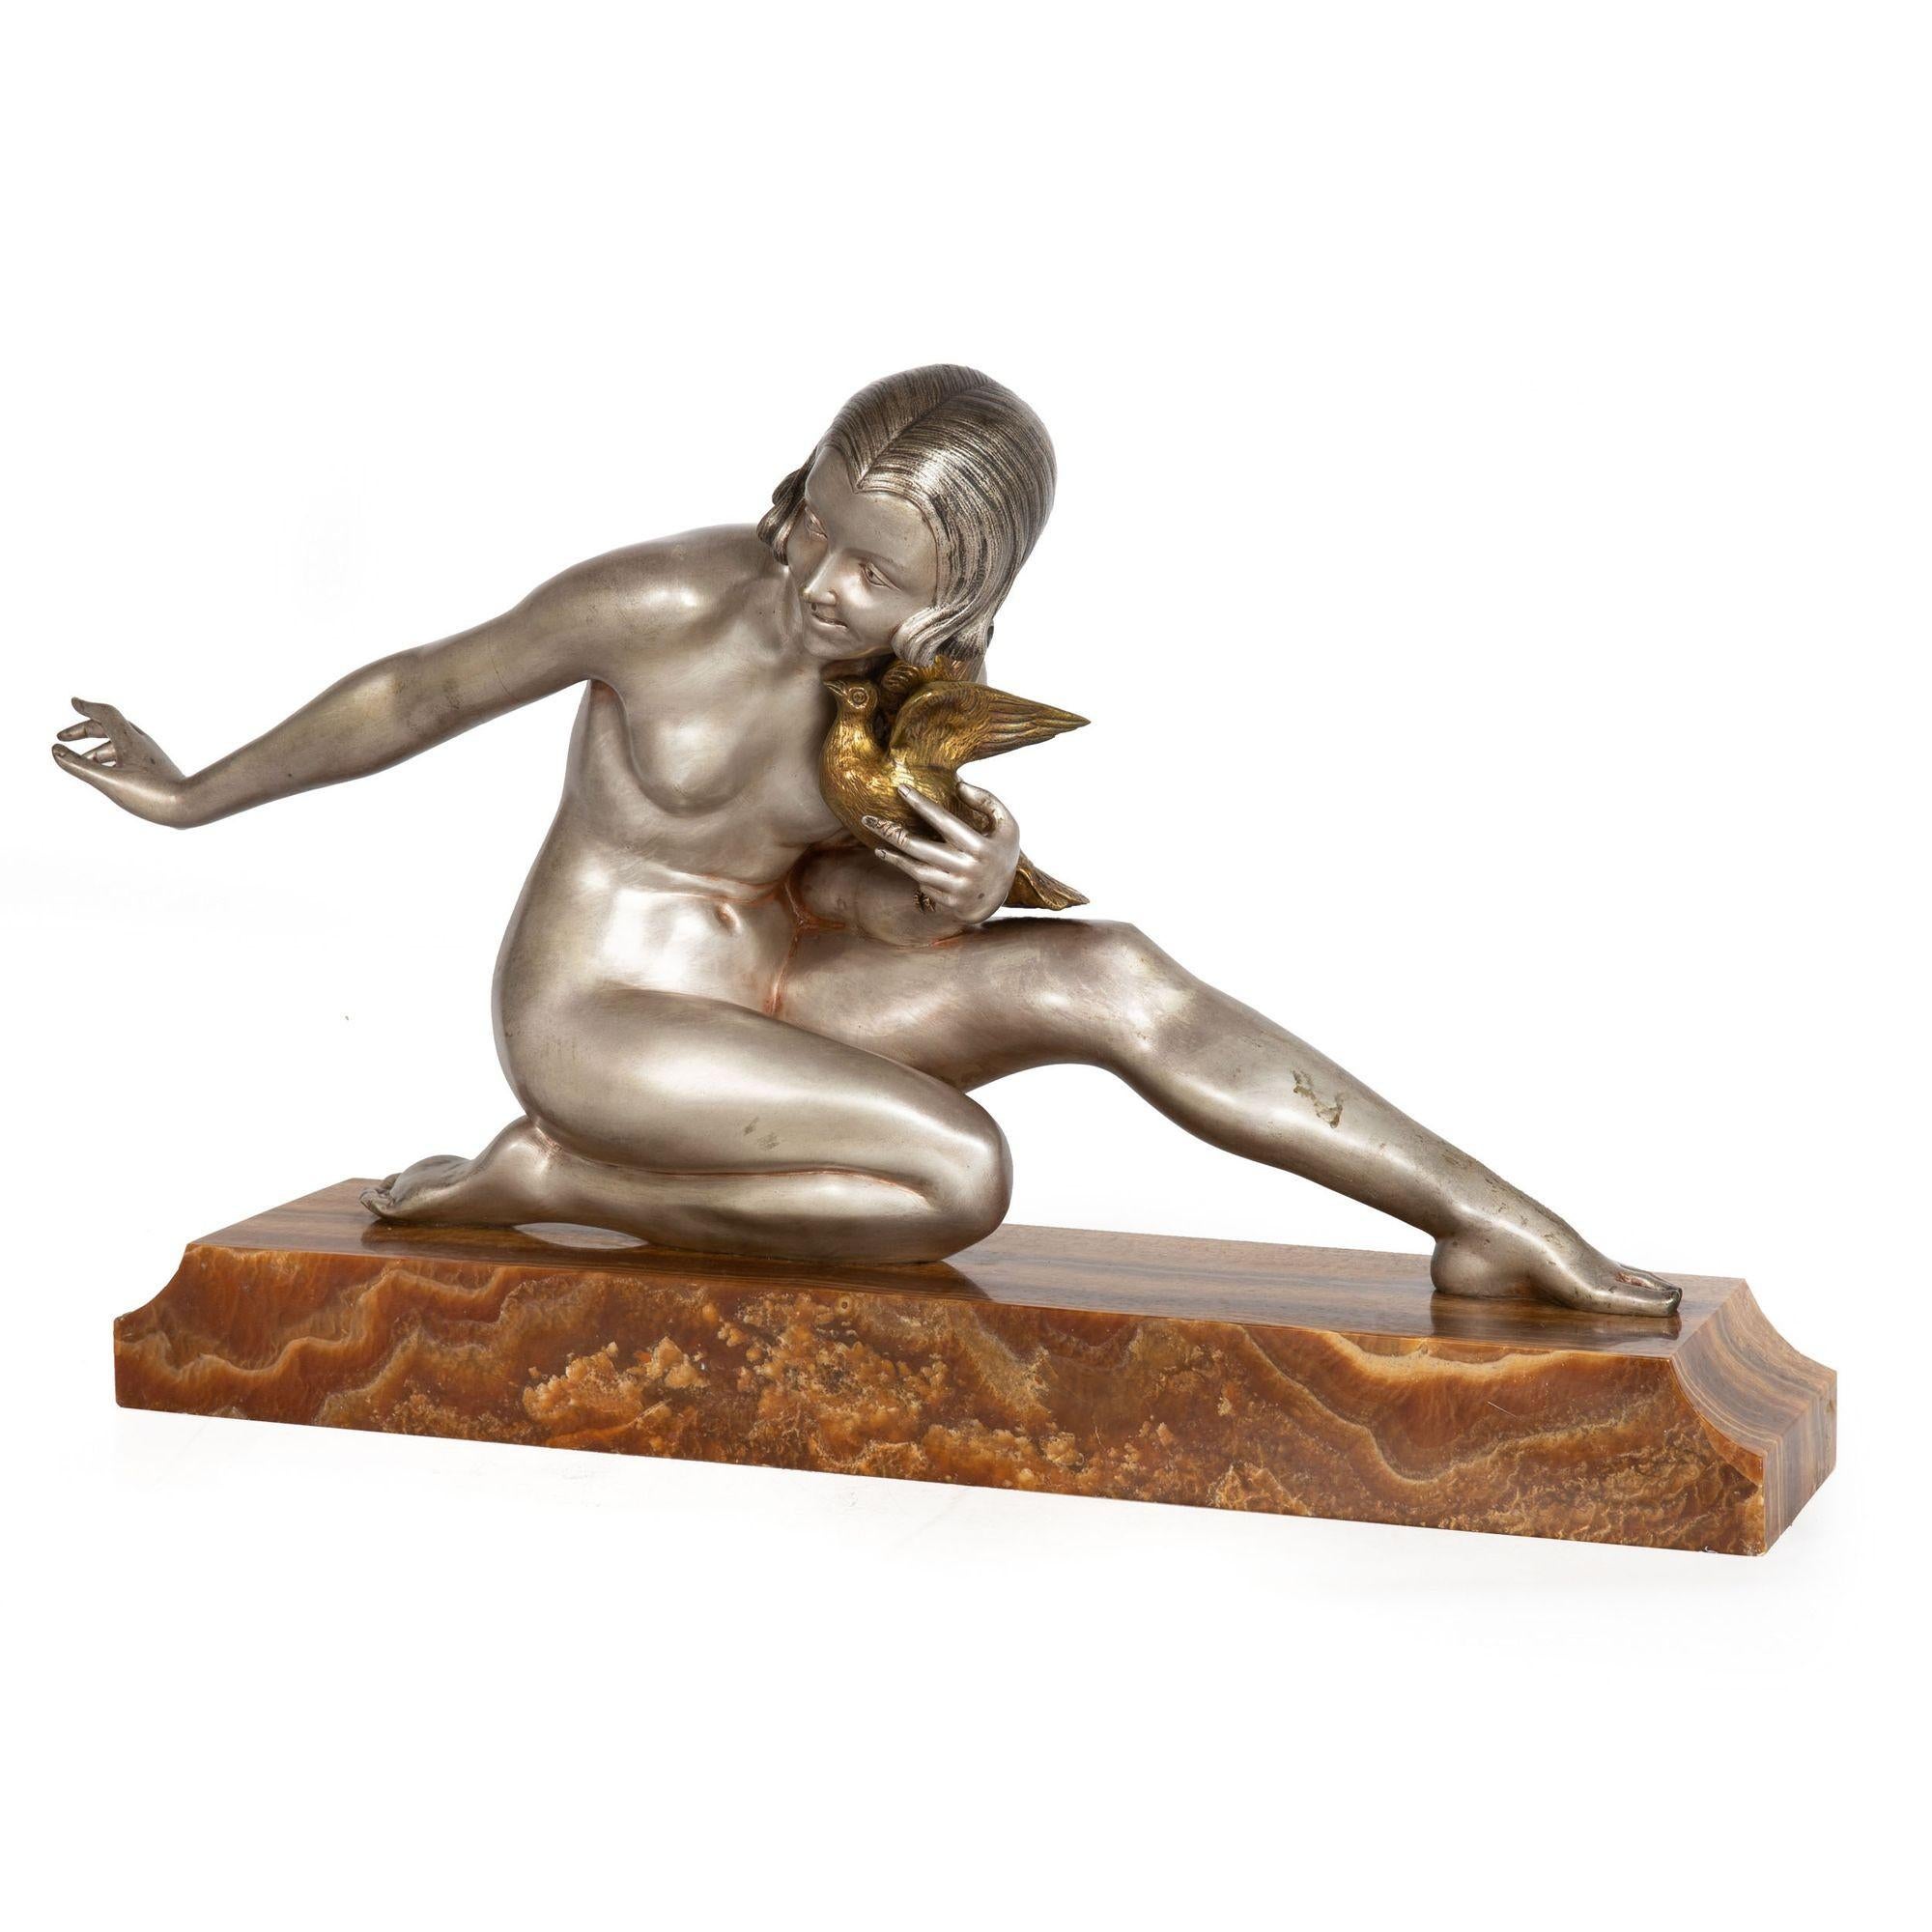 ARMAND GODARD
French, fl. 1920s

Seated Woman Holding a Bird

Silver patinated bronze situated over prehistoric petrified wood base  engraved on the base GODARD

Item # 303XAF30W 

An exquisitely cast example of Armand Godard's Seated Woman Holding